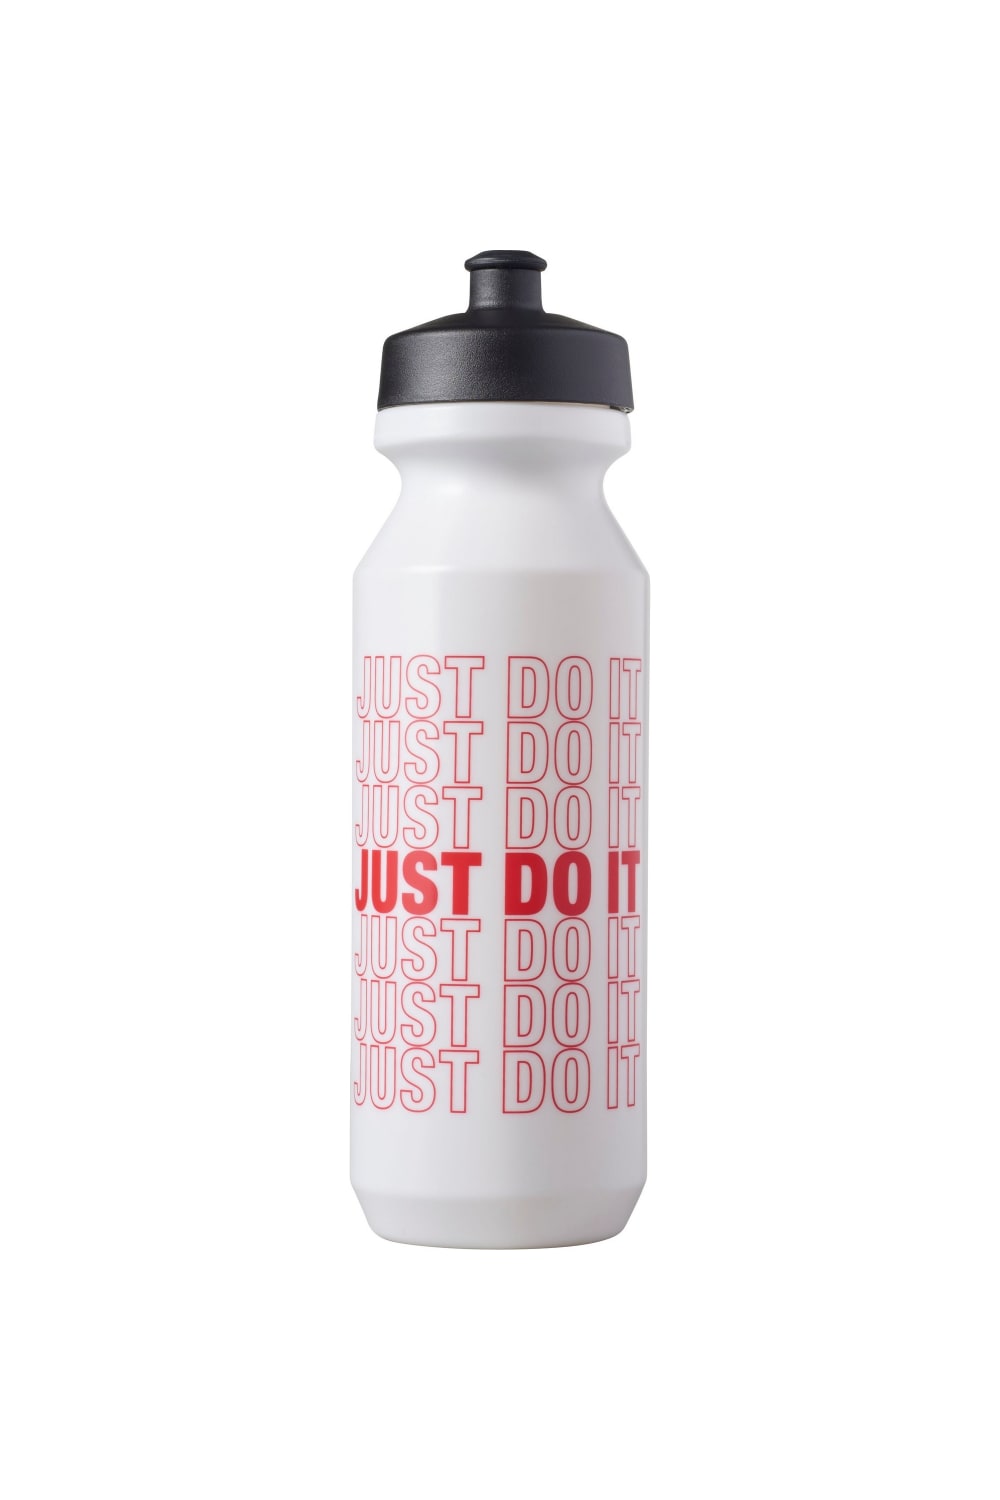 Nike Big Mouth Water Bottle 2.0 (32oz) (White/Black/Sport Red) (One Size)